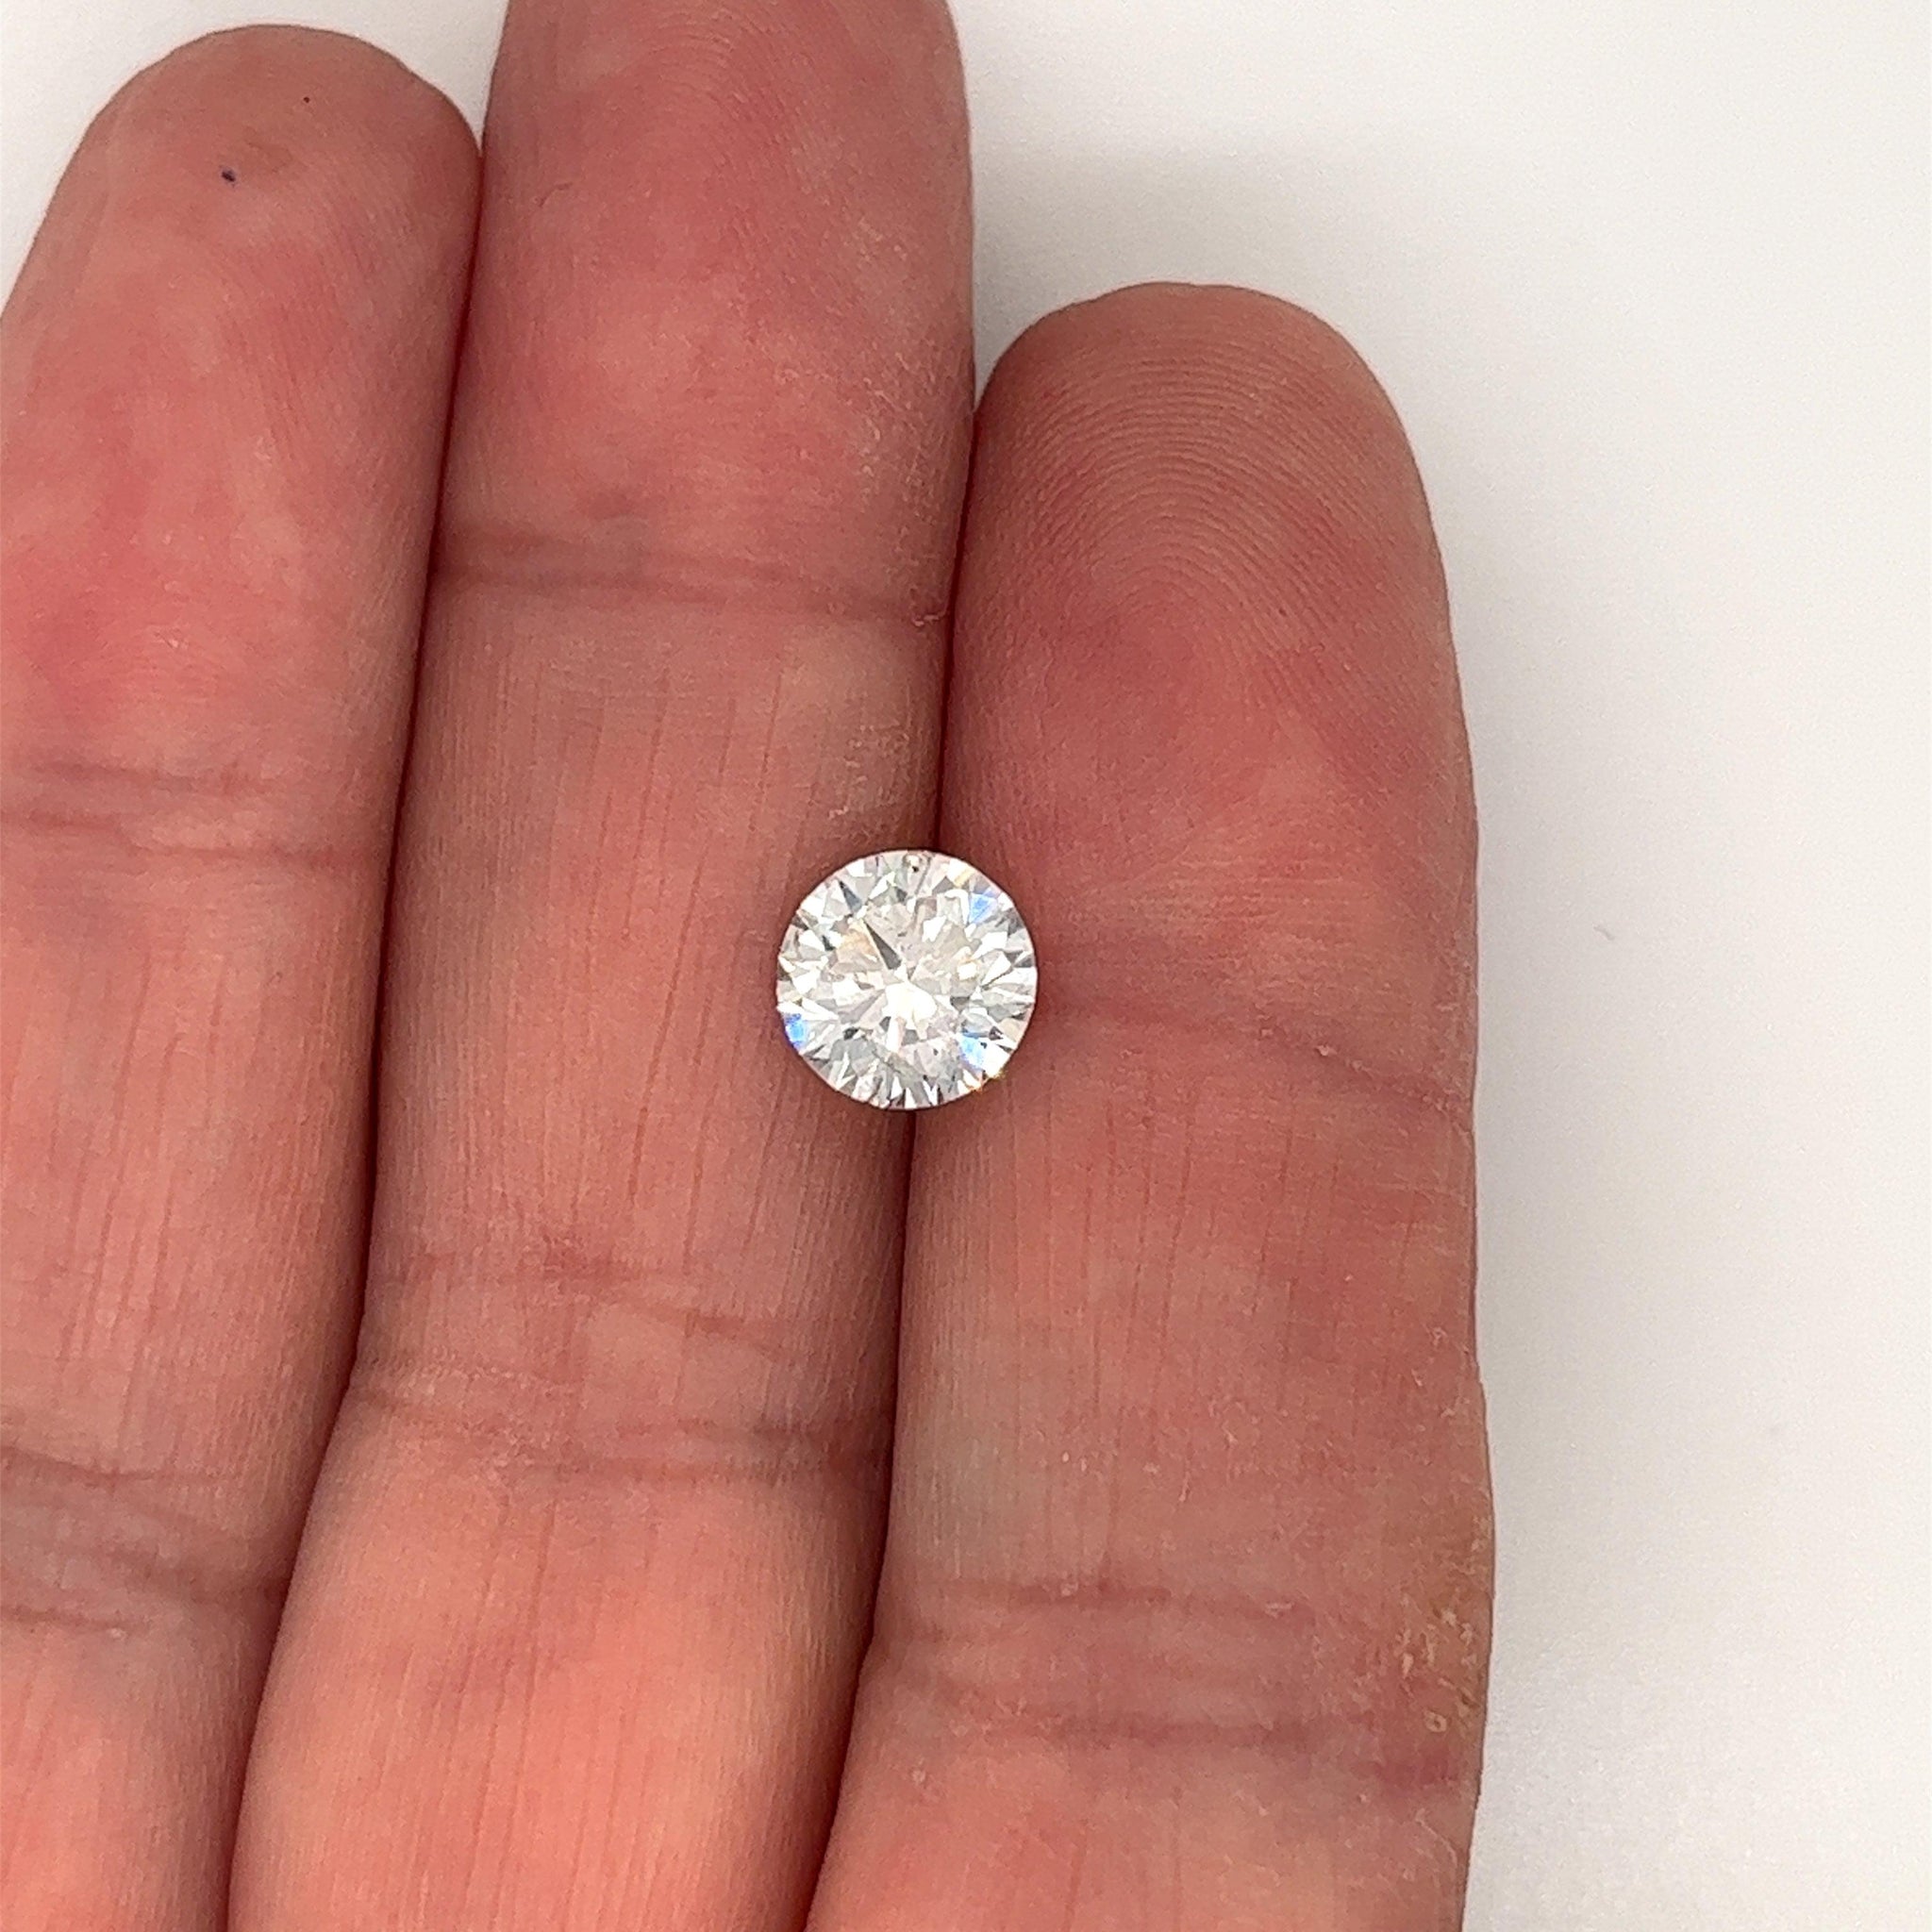 GIA Certified Natural 1.72 Carat Loose Diamond Round-Brilliant-Cut H Color - I1 Clarity - Excellent Cut